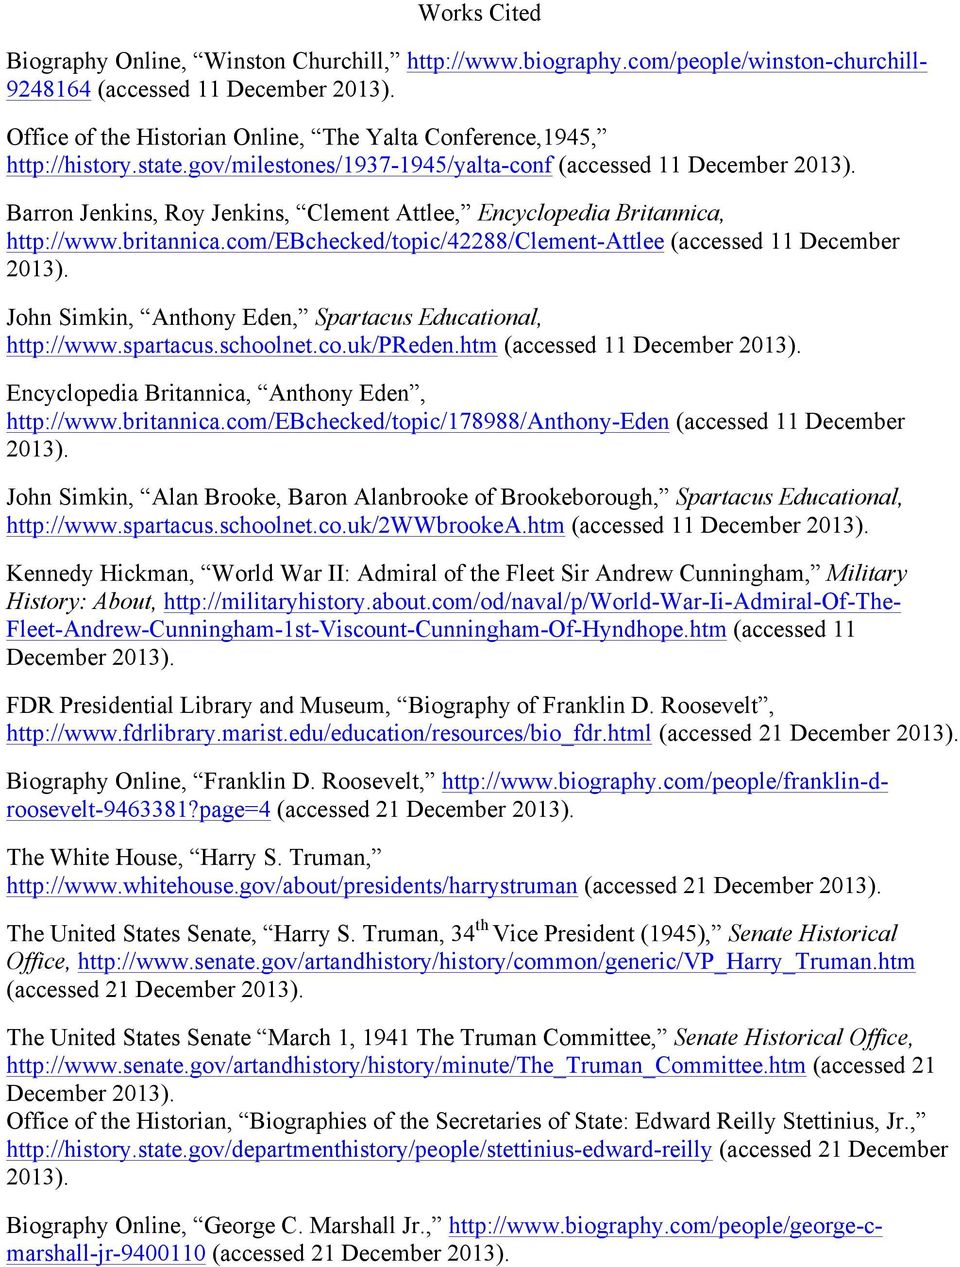 Barron Jenkins, Roy Jenkins, Clement Attlee, Encyclopedia Britannica, http://www.britannica.com/ebchecked/topic/42288/clement-attlee (accessed 11 December 2013).